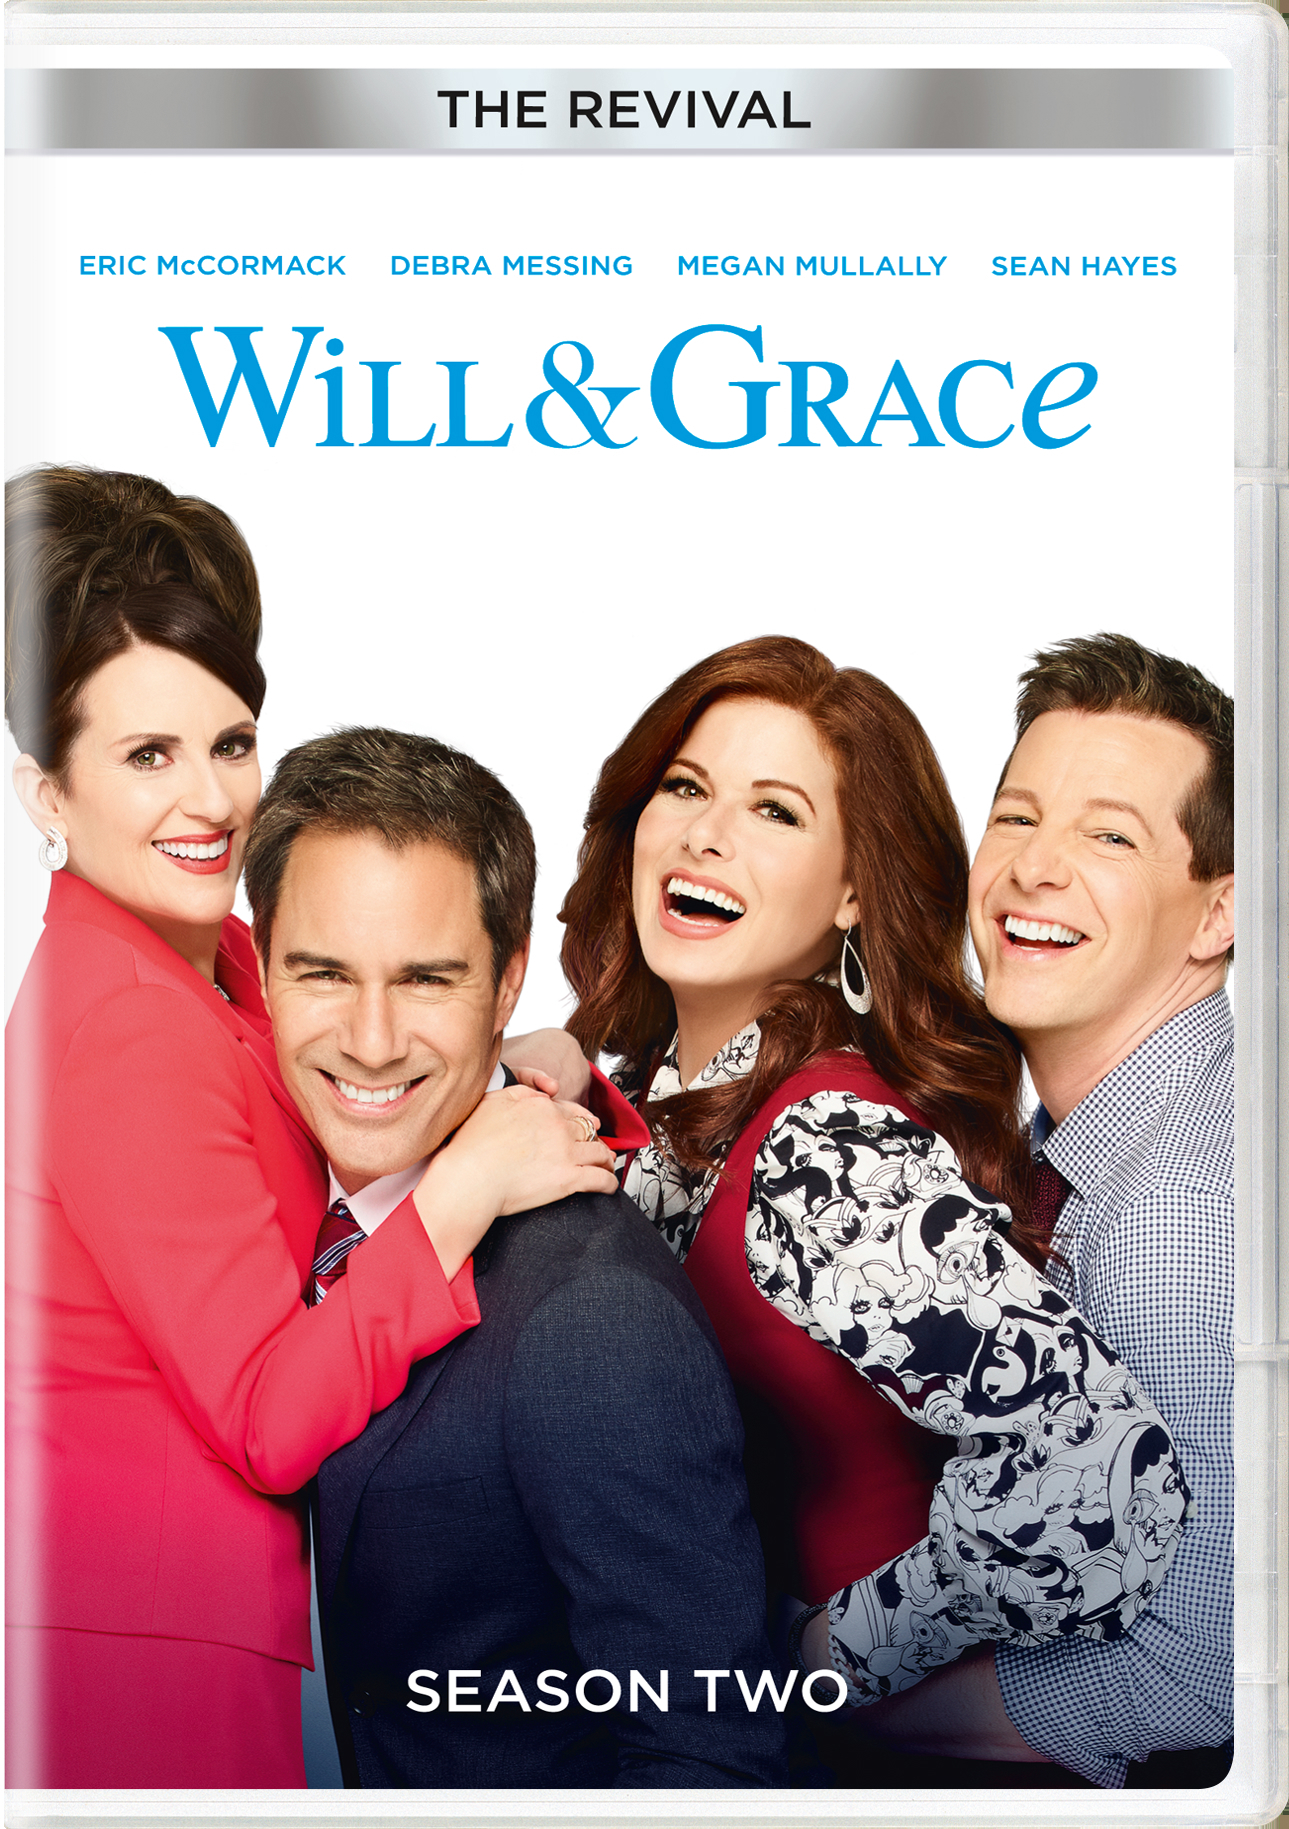 Will And Grace - The Revival: Season Two - DVD [ 2019 ]  - Comedy Television On DVD - TV Shows On GRUV